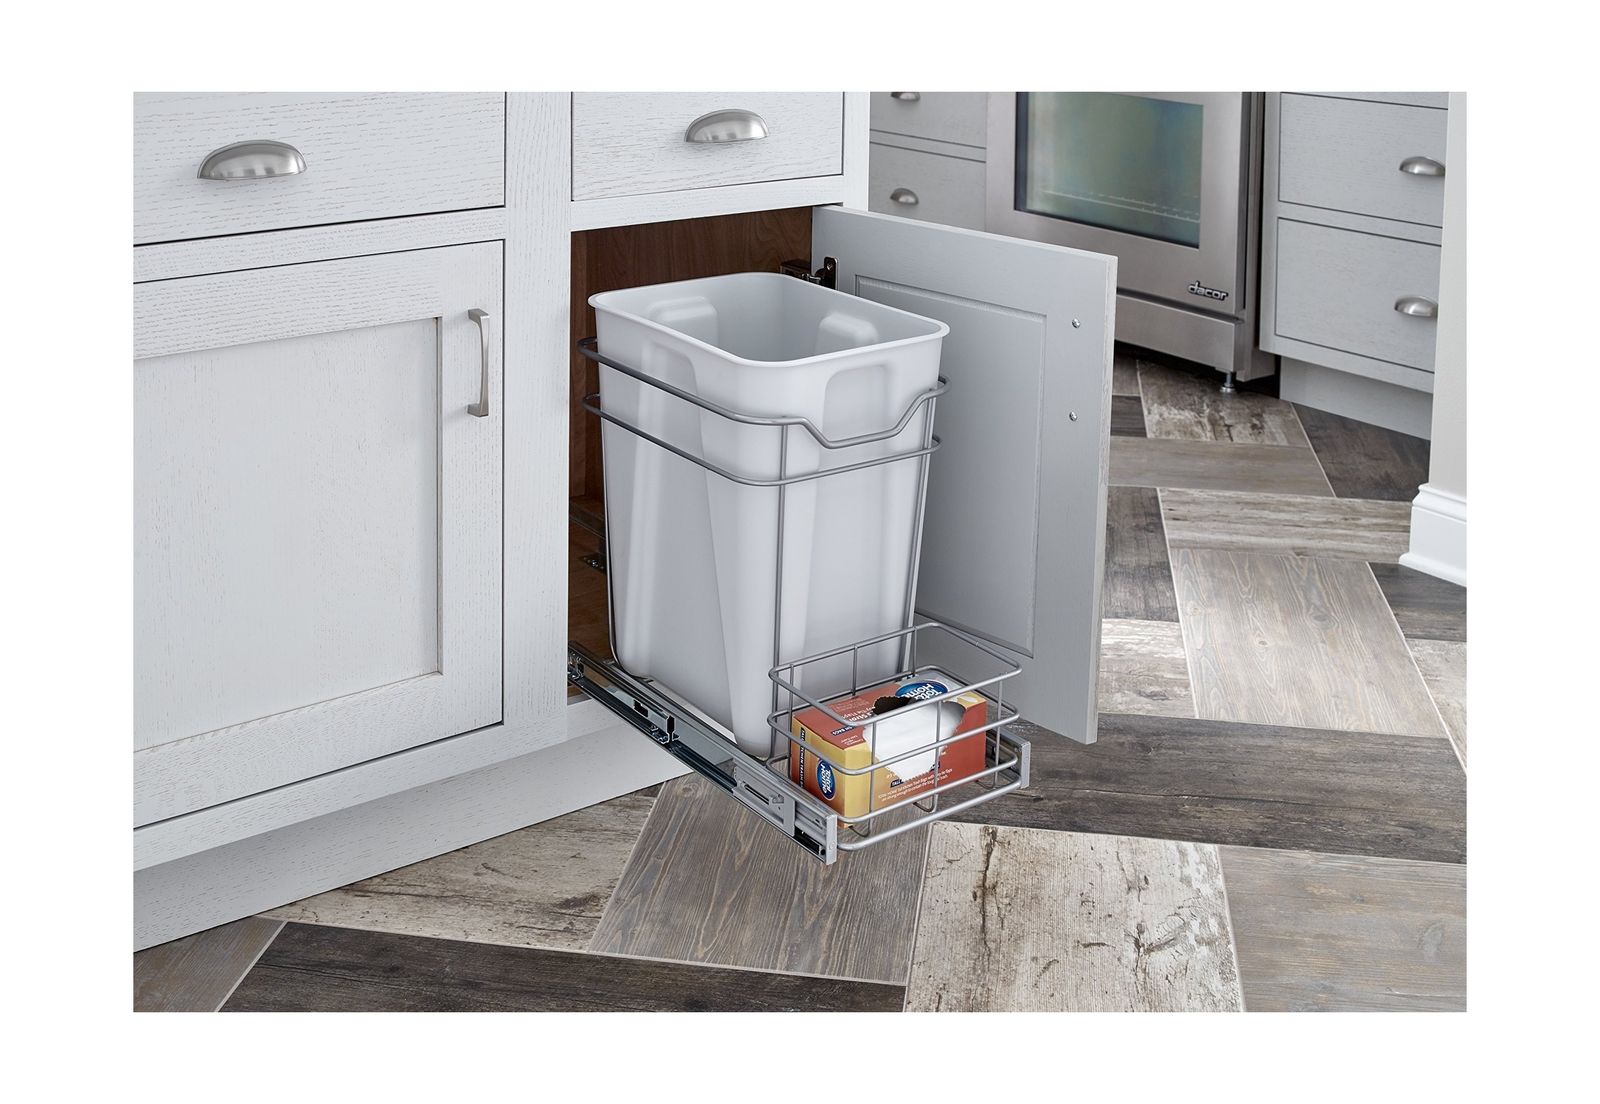 Kitchen Rubbish Storage Trashcan Under Cabinet Pull Out Combined Bin